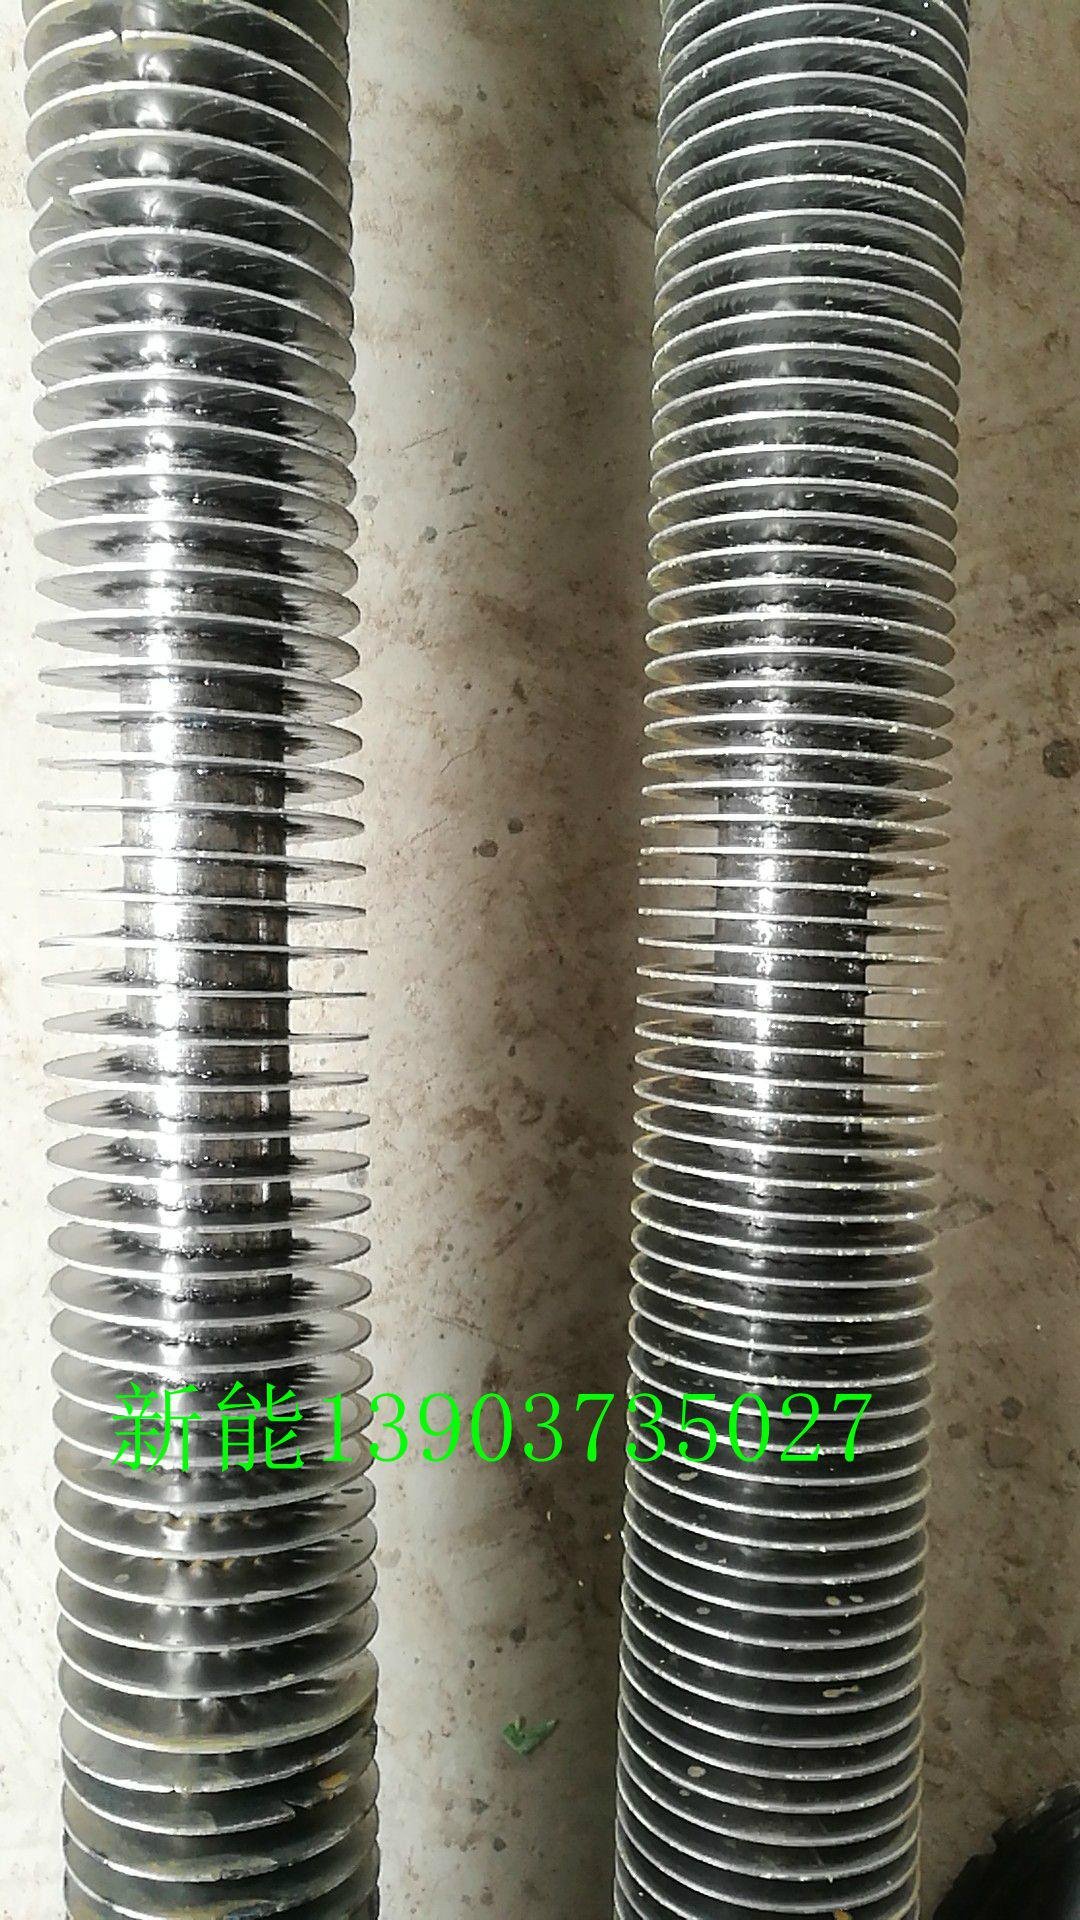 Supply high frequency spiral finned tube 2